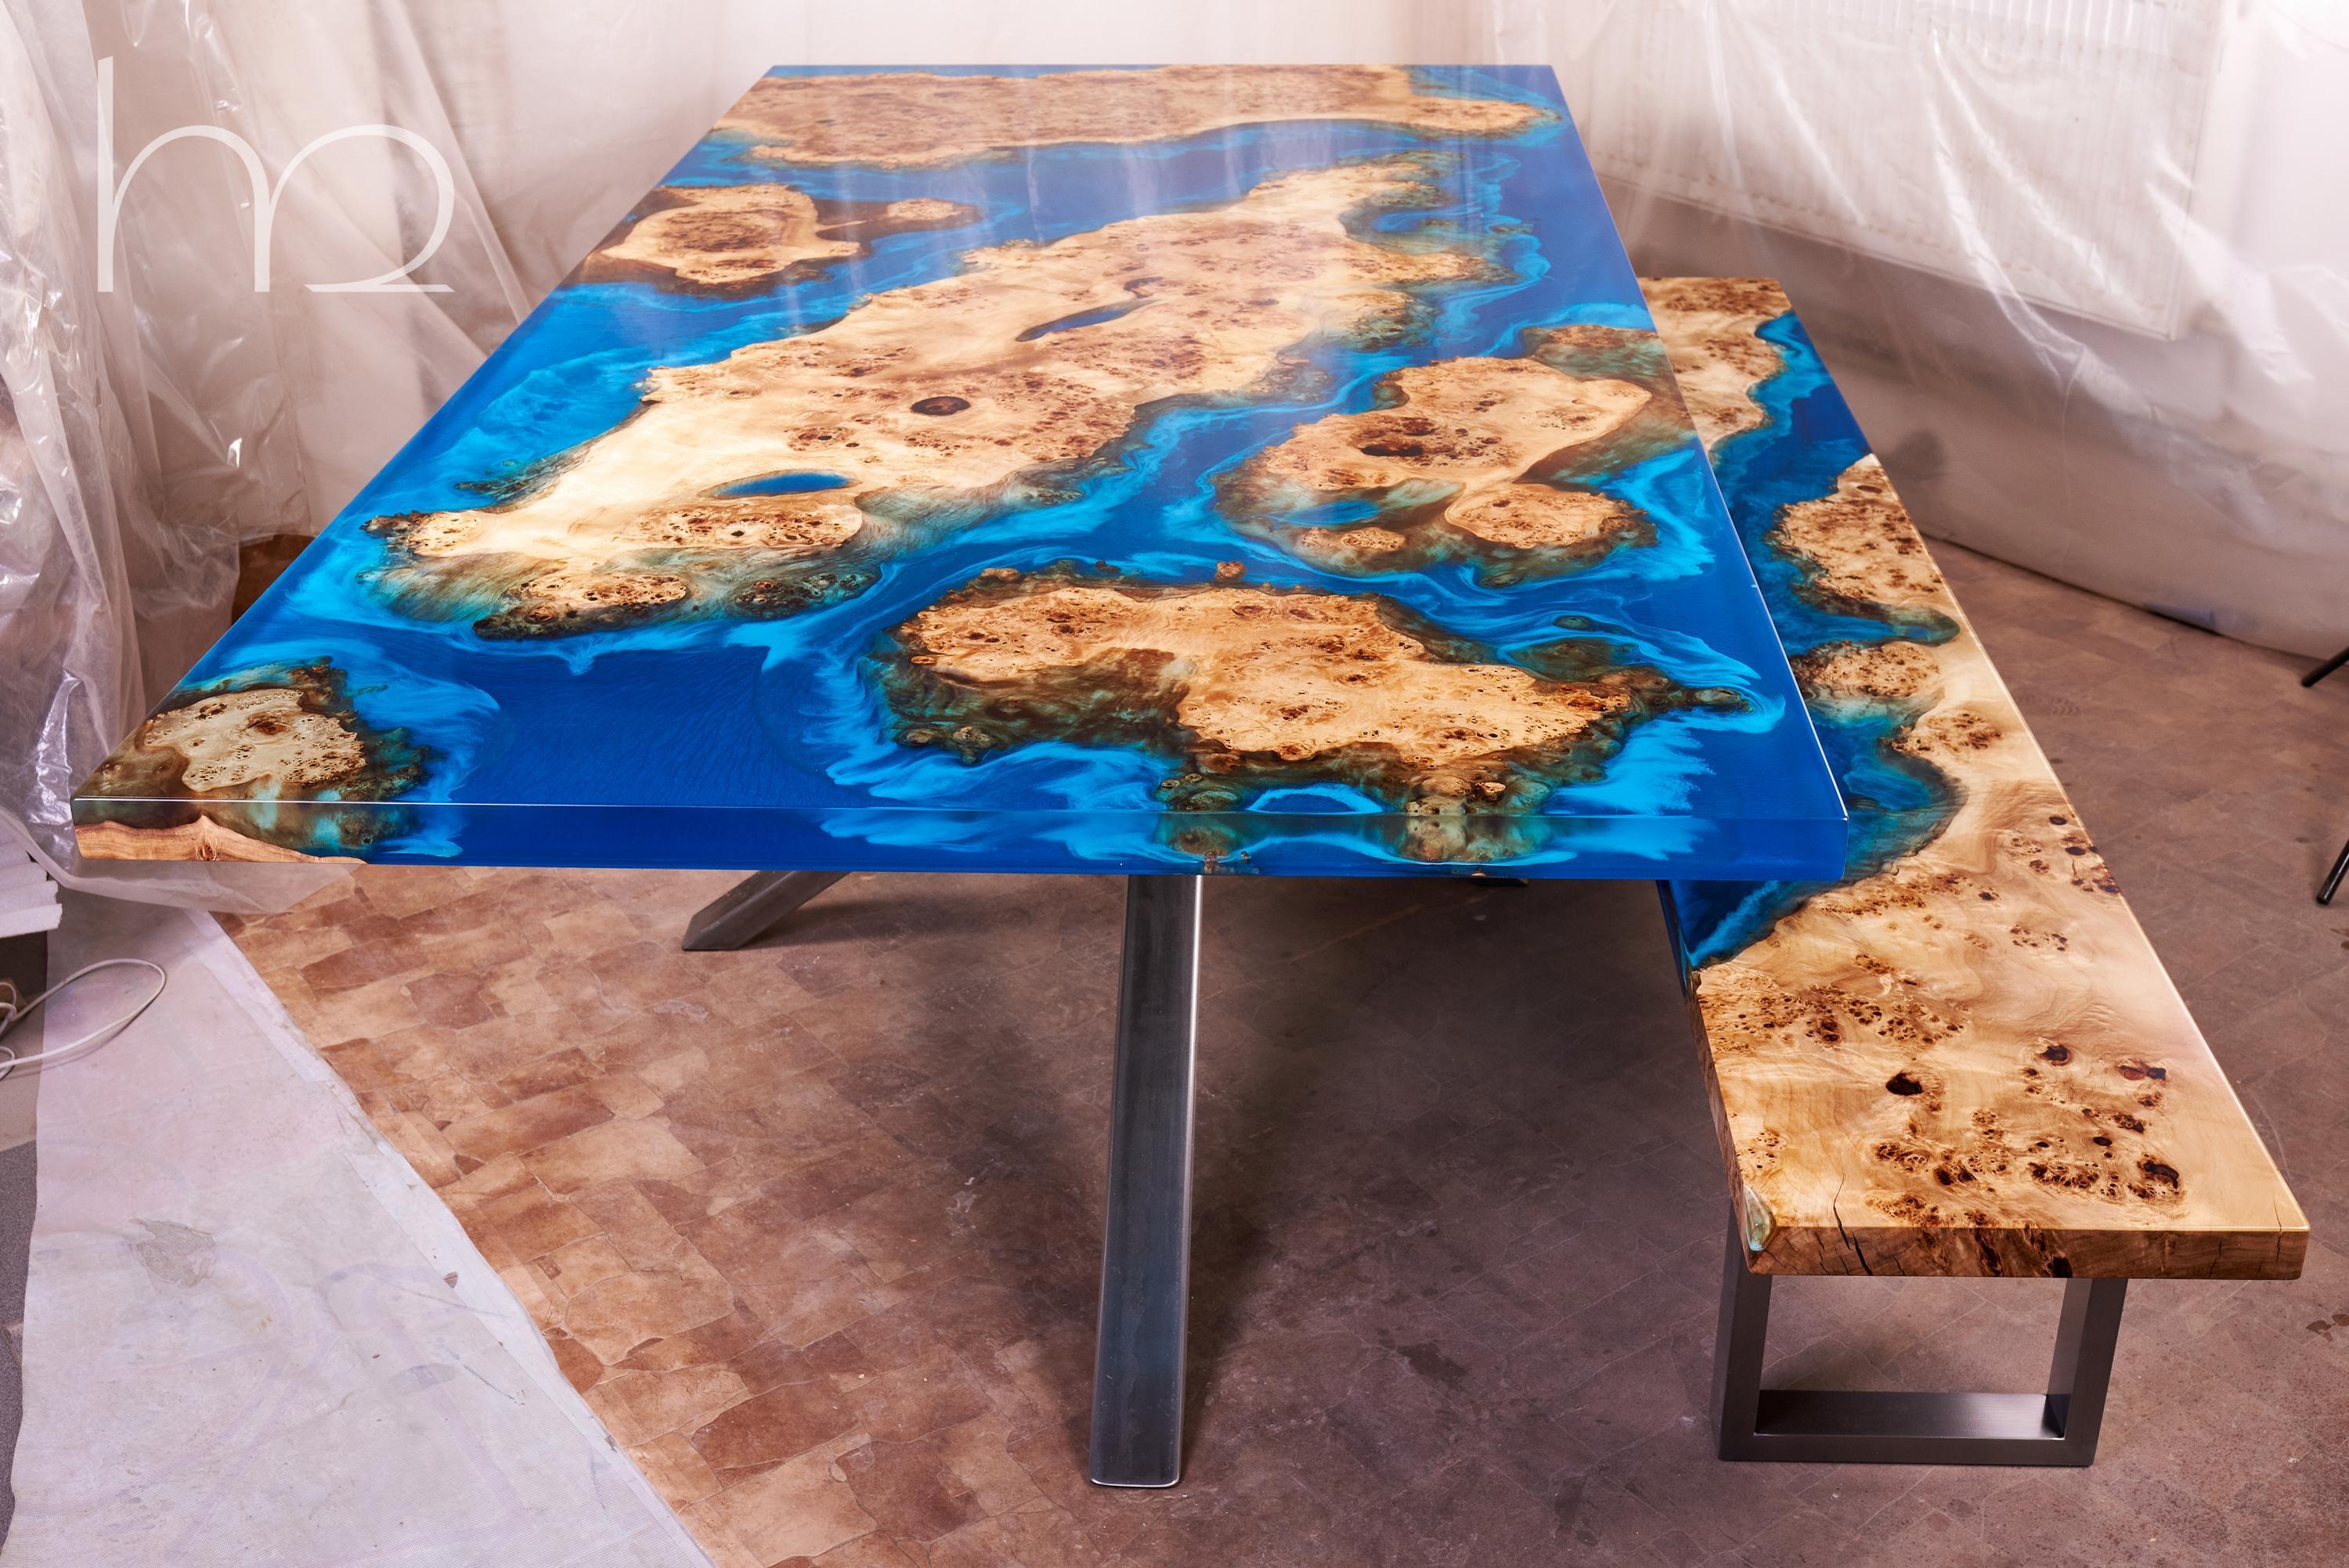 The table is made of magnificent ancient slabs of burl wood. Their texture has been shaped over hundreds of years to look as it does now. When the wood dried, we decided to immortalize it in this form. How many generations has it been watching? How